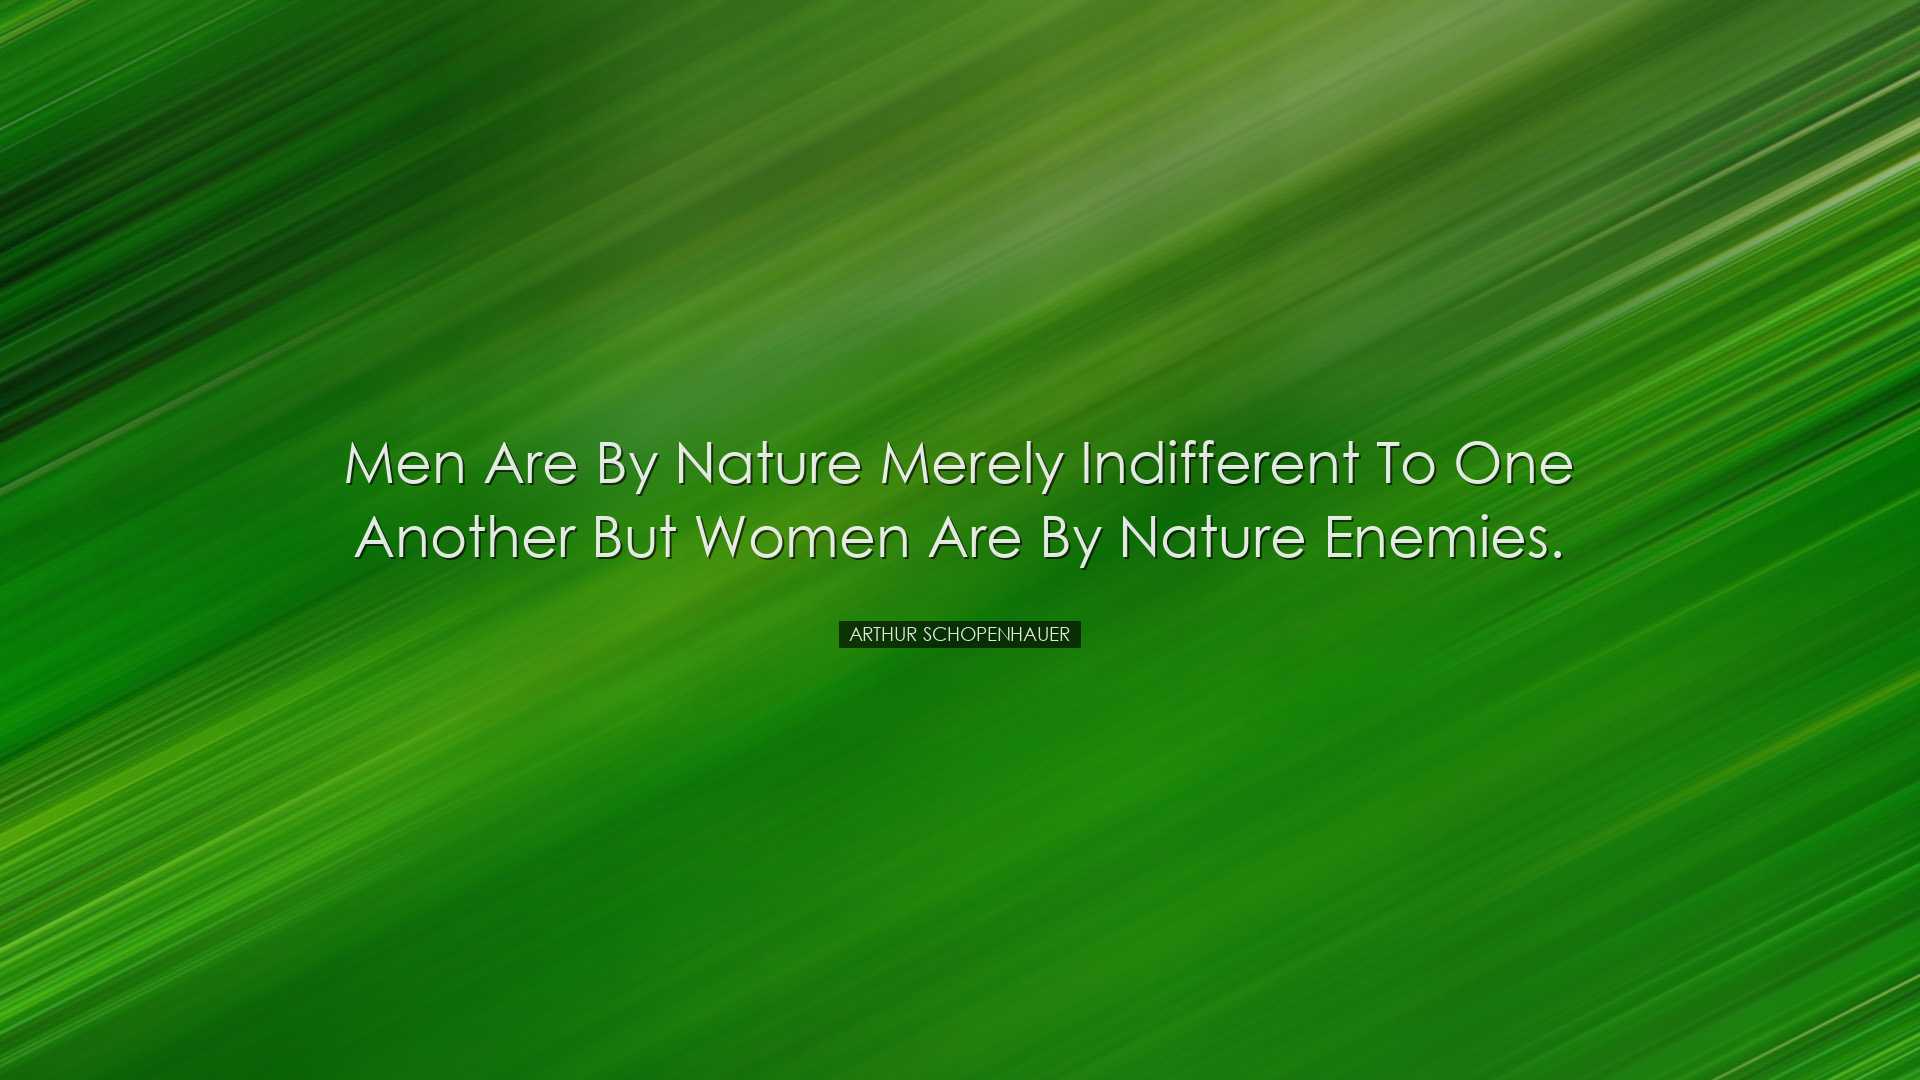 Men are by nature merely indifferent to one another but women are